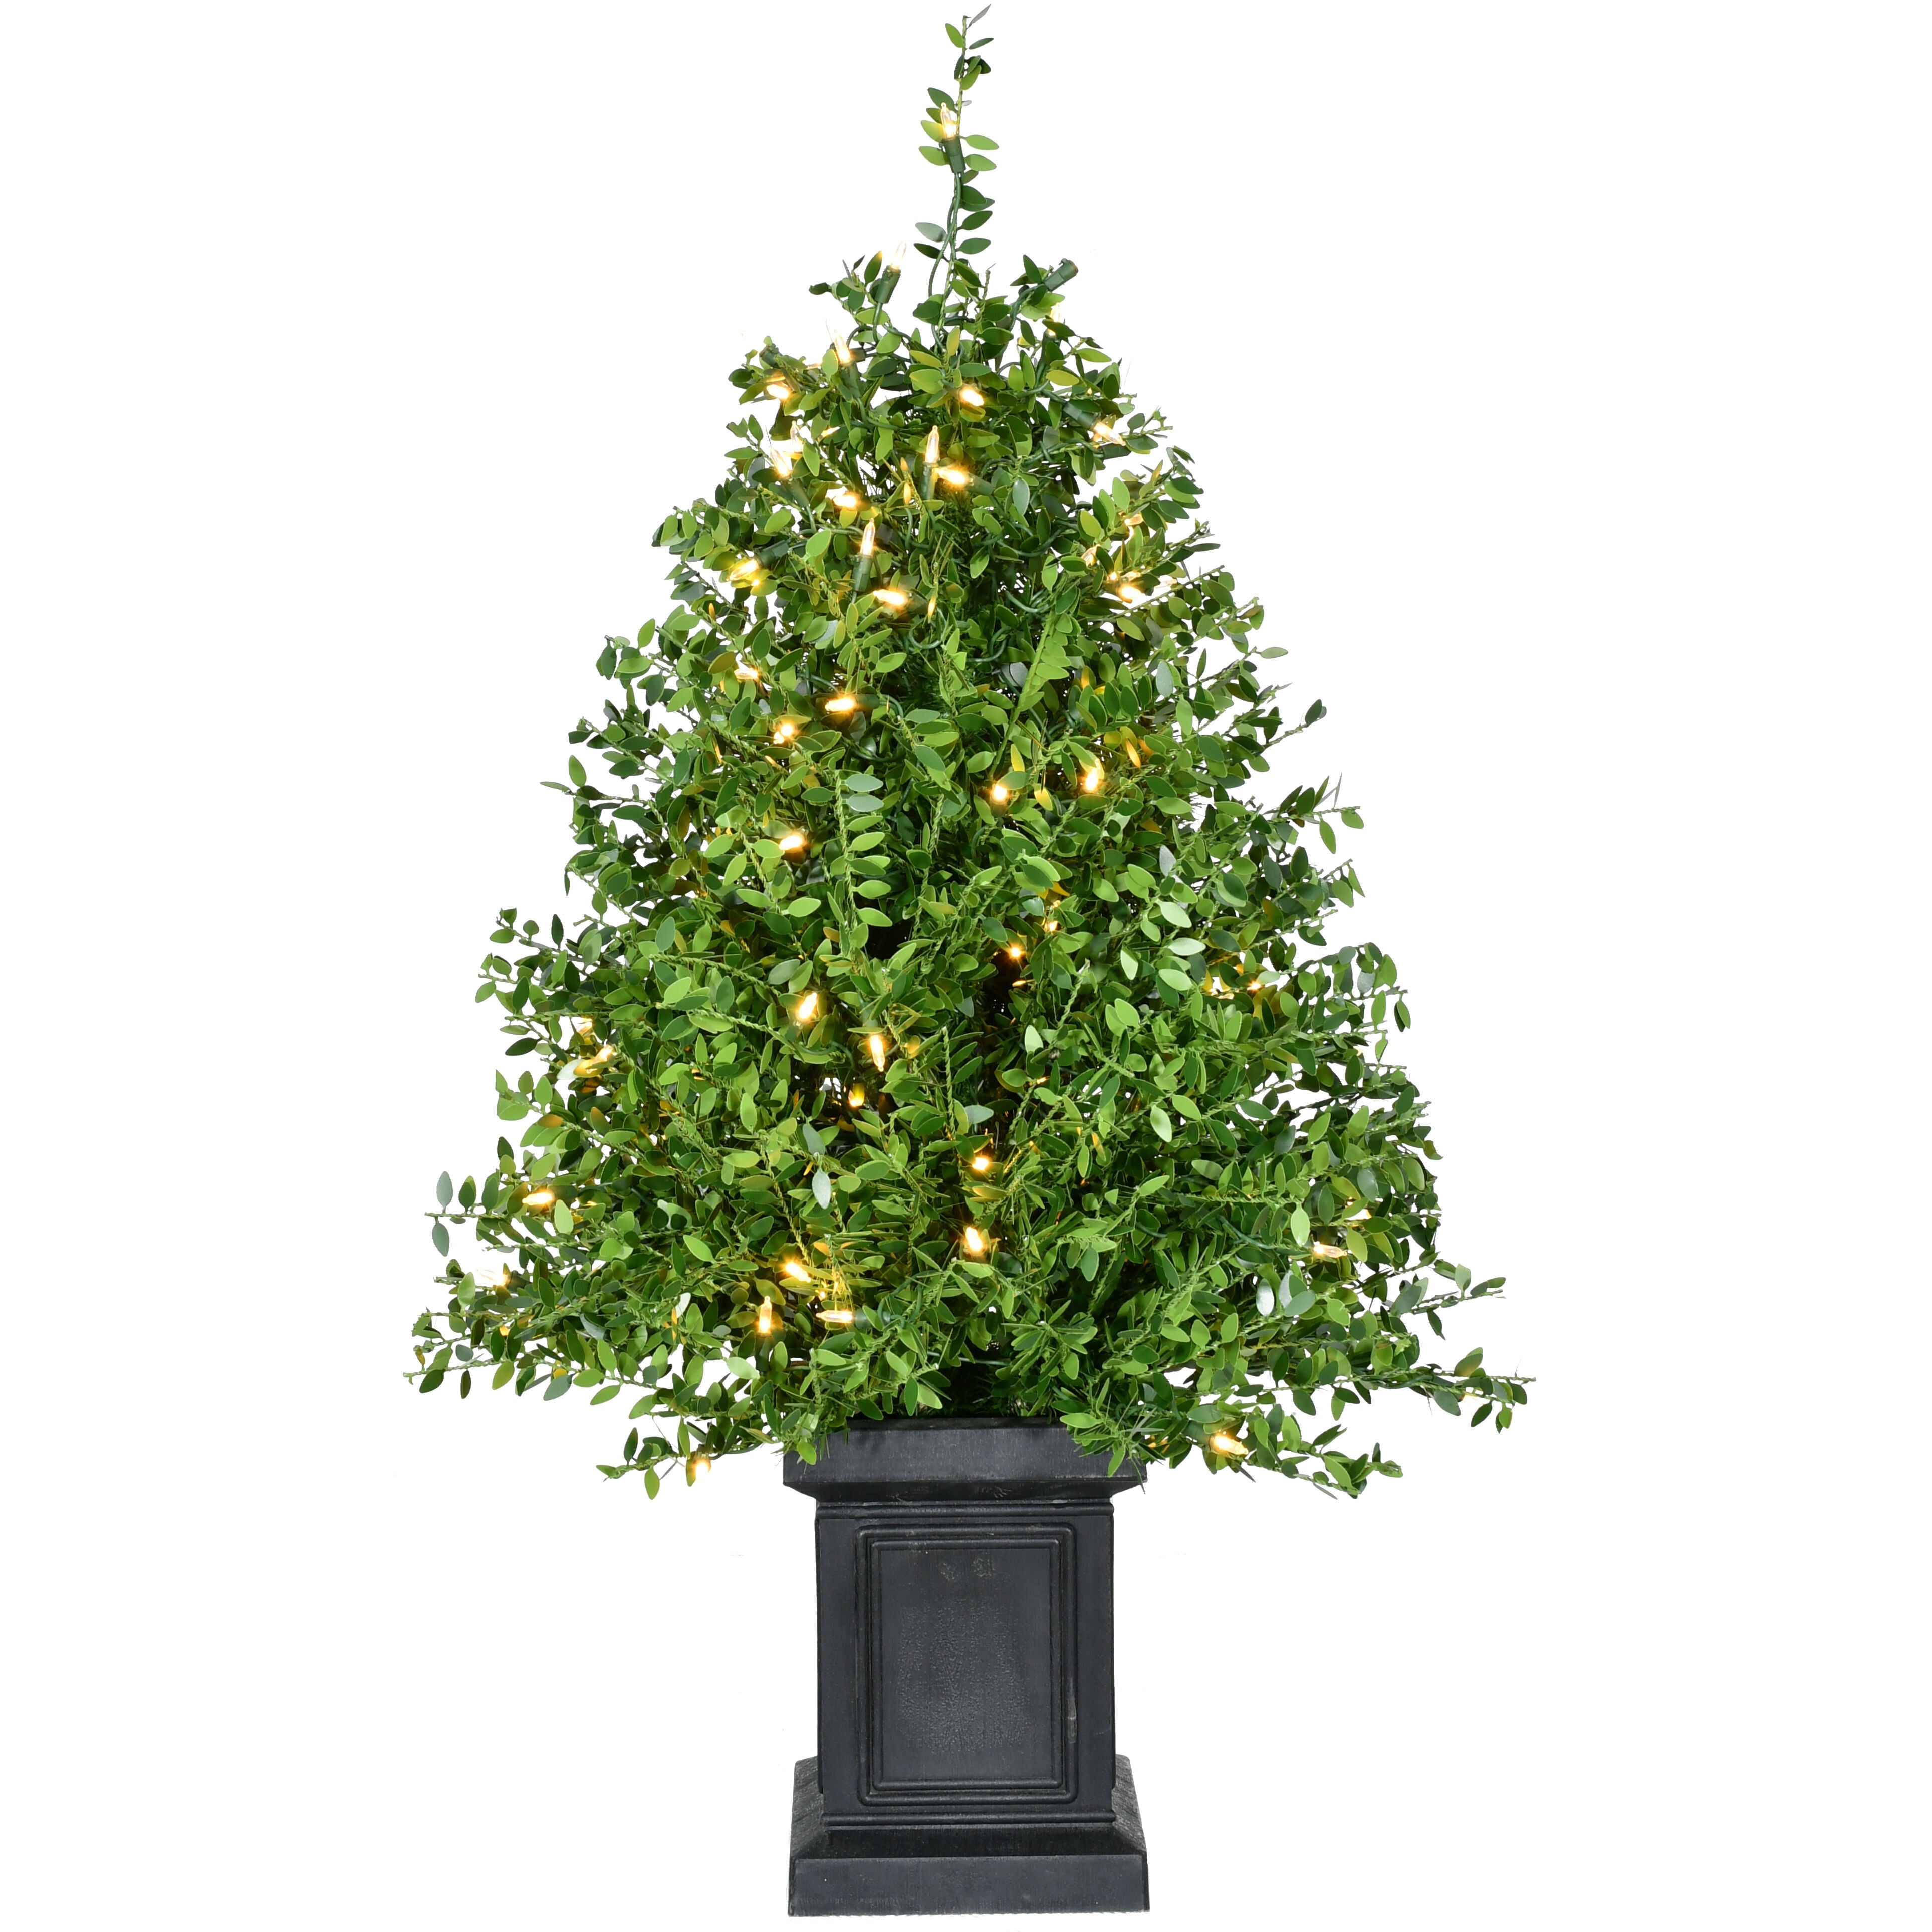 Fraser Hill Farm -  2-Ft. Boxwood Porch Tree in Black Pot with Warm White Lights, Set of 2